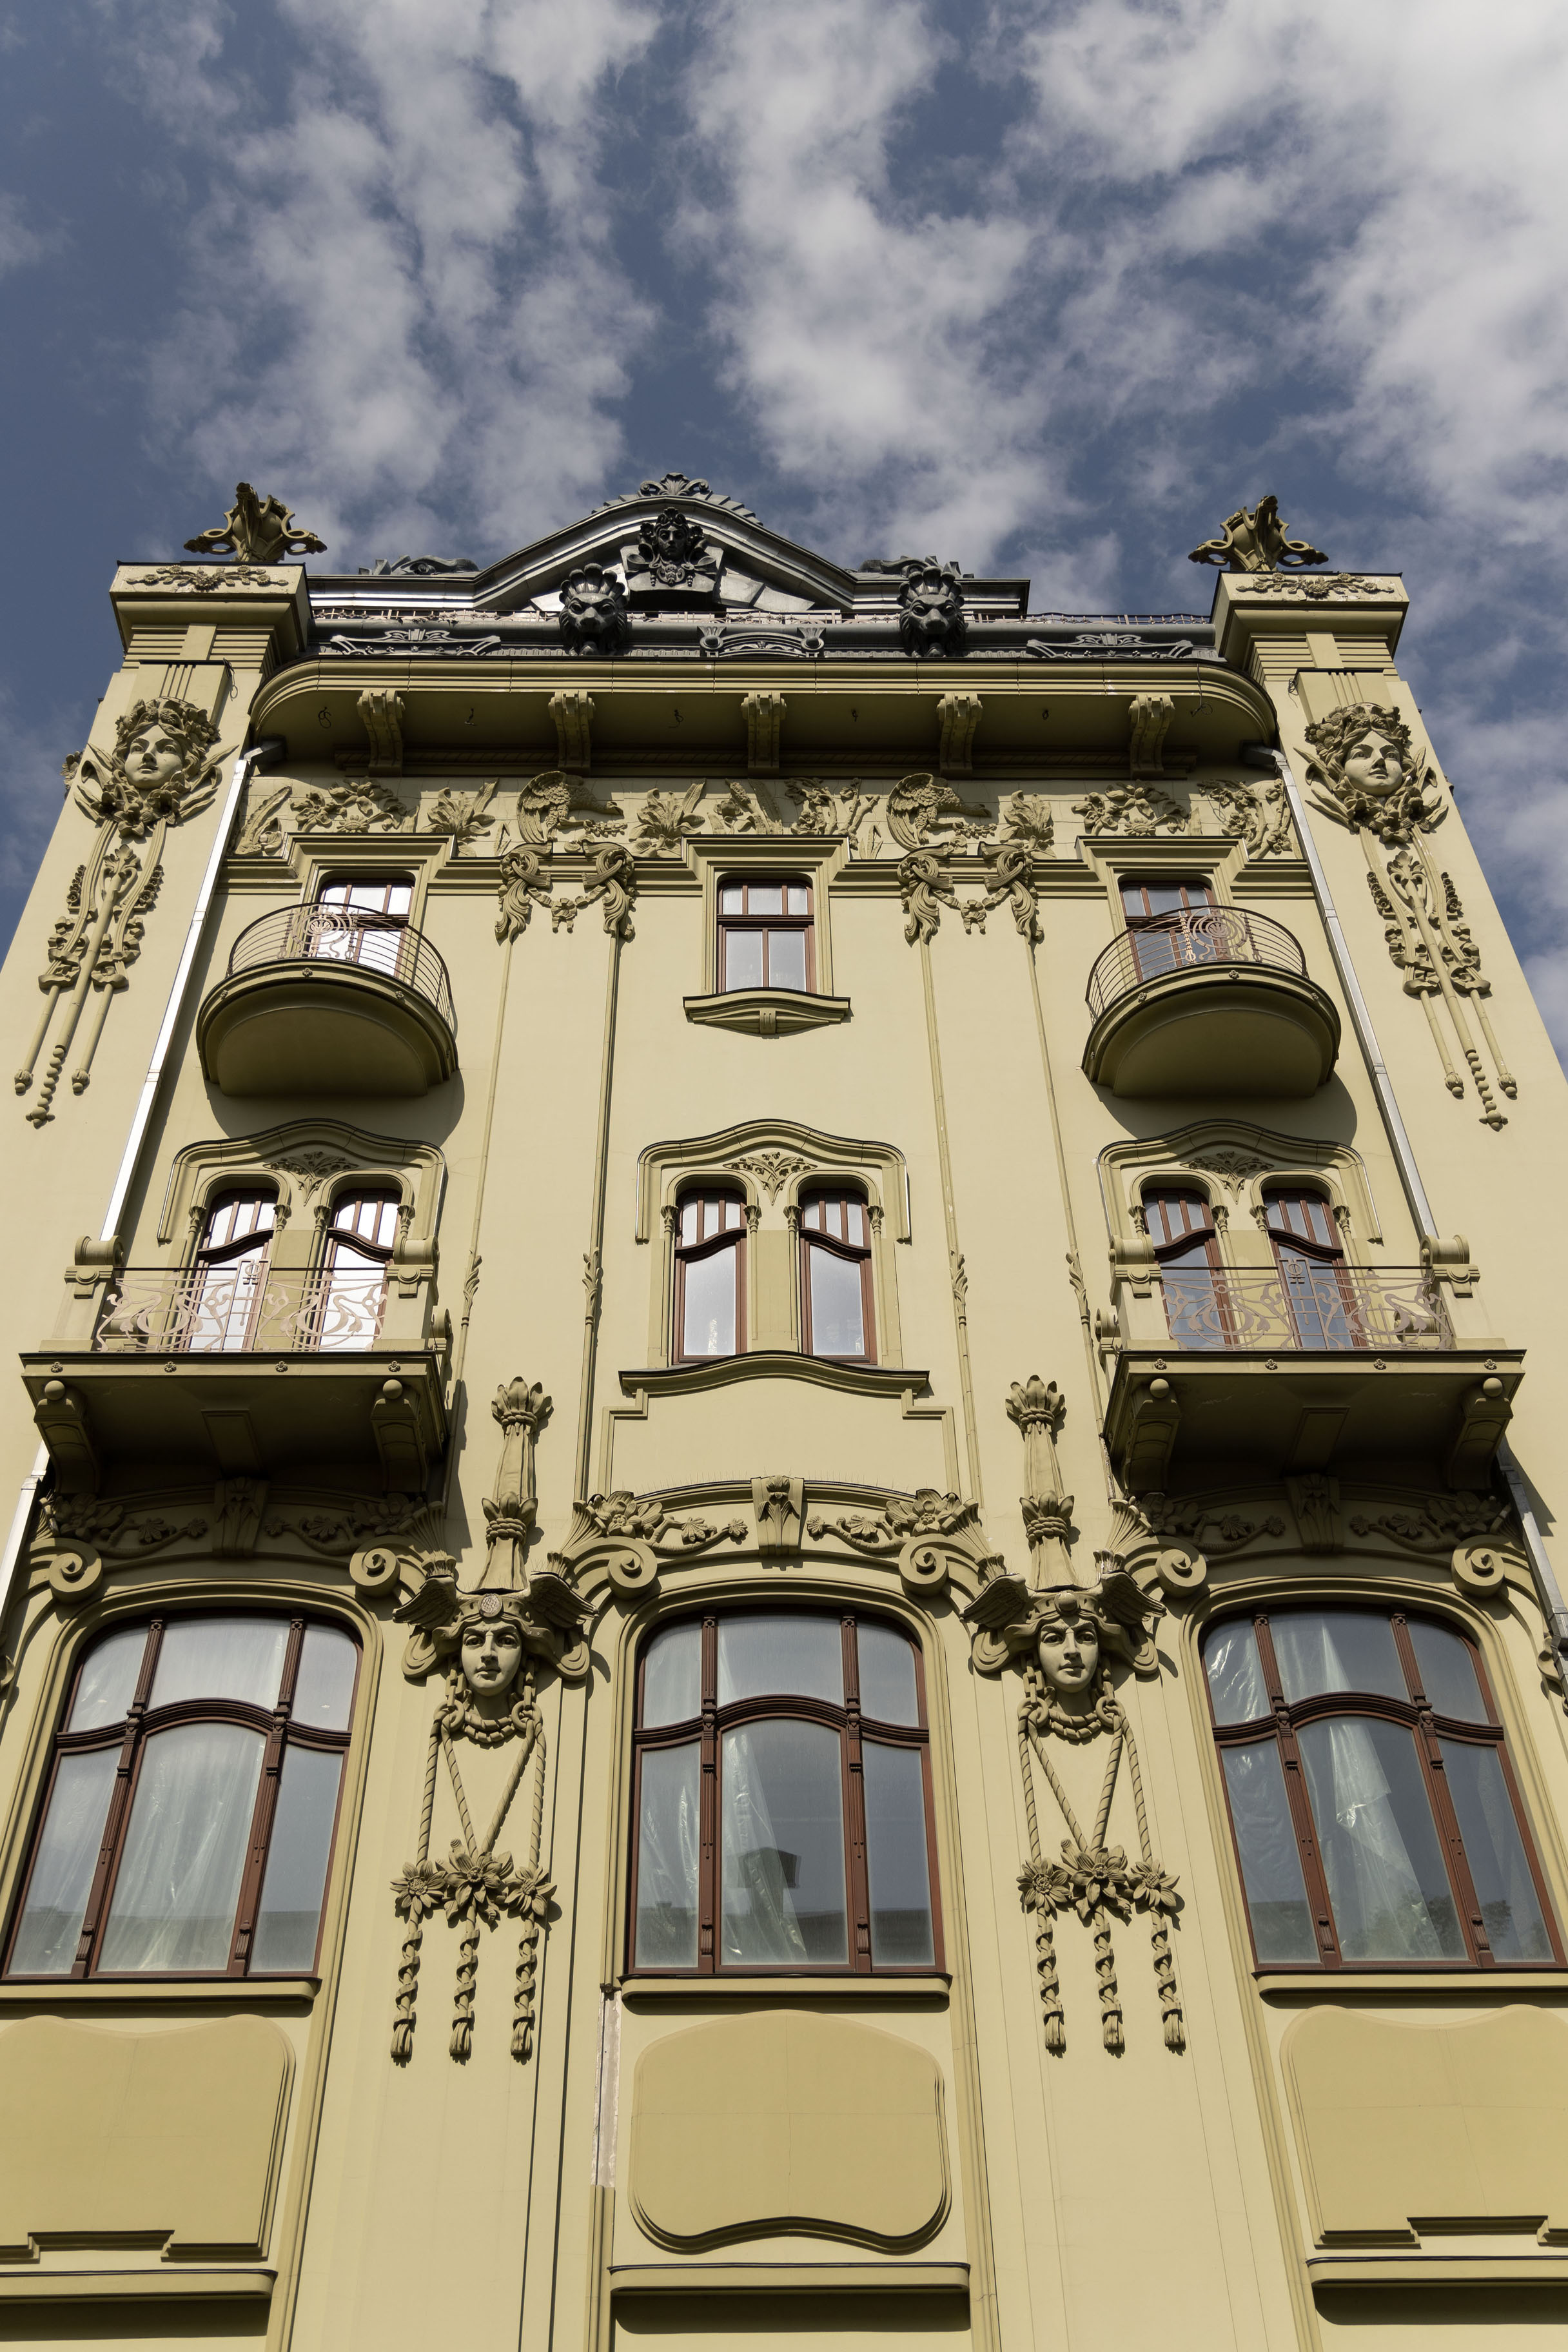 Looking up one of the many elegant buildings in Odesa | Impressioni di Odesa | Ucraina